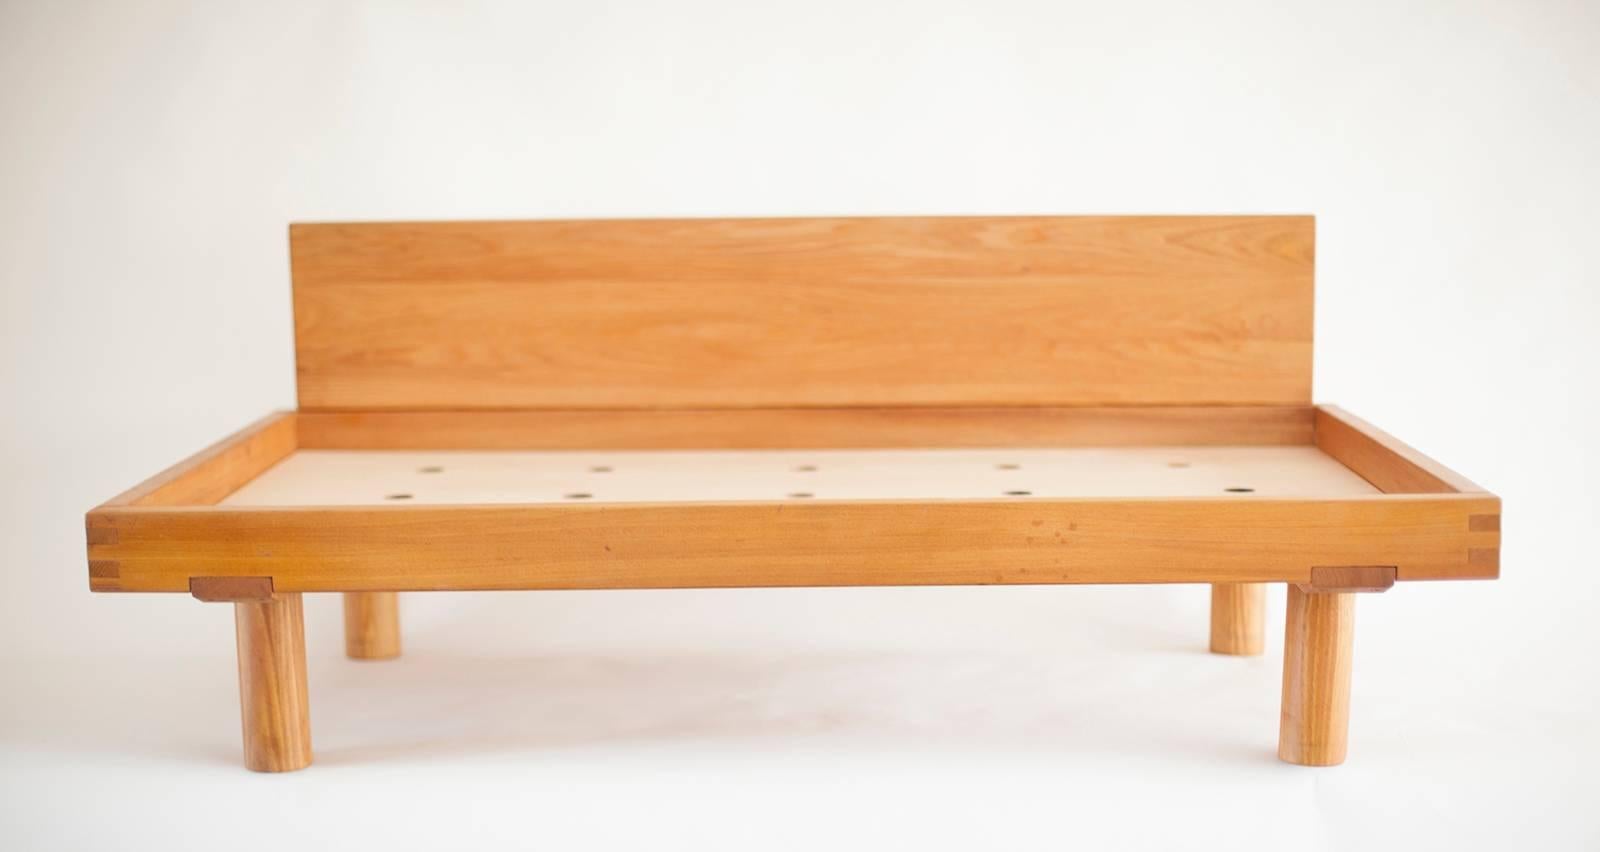 Pierre Chapo two-seat bench seat L09D
Date: 1960
Manufactured by Pierre Chapo.
Materials: Vintage elm
Dimension: 76 cm width x 29 cm height x 132 cm length
Height with back: 53 cm
We sell it without the cushions.